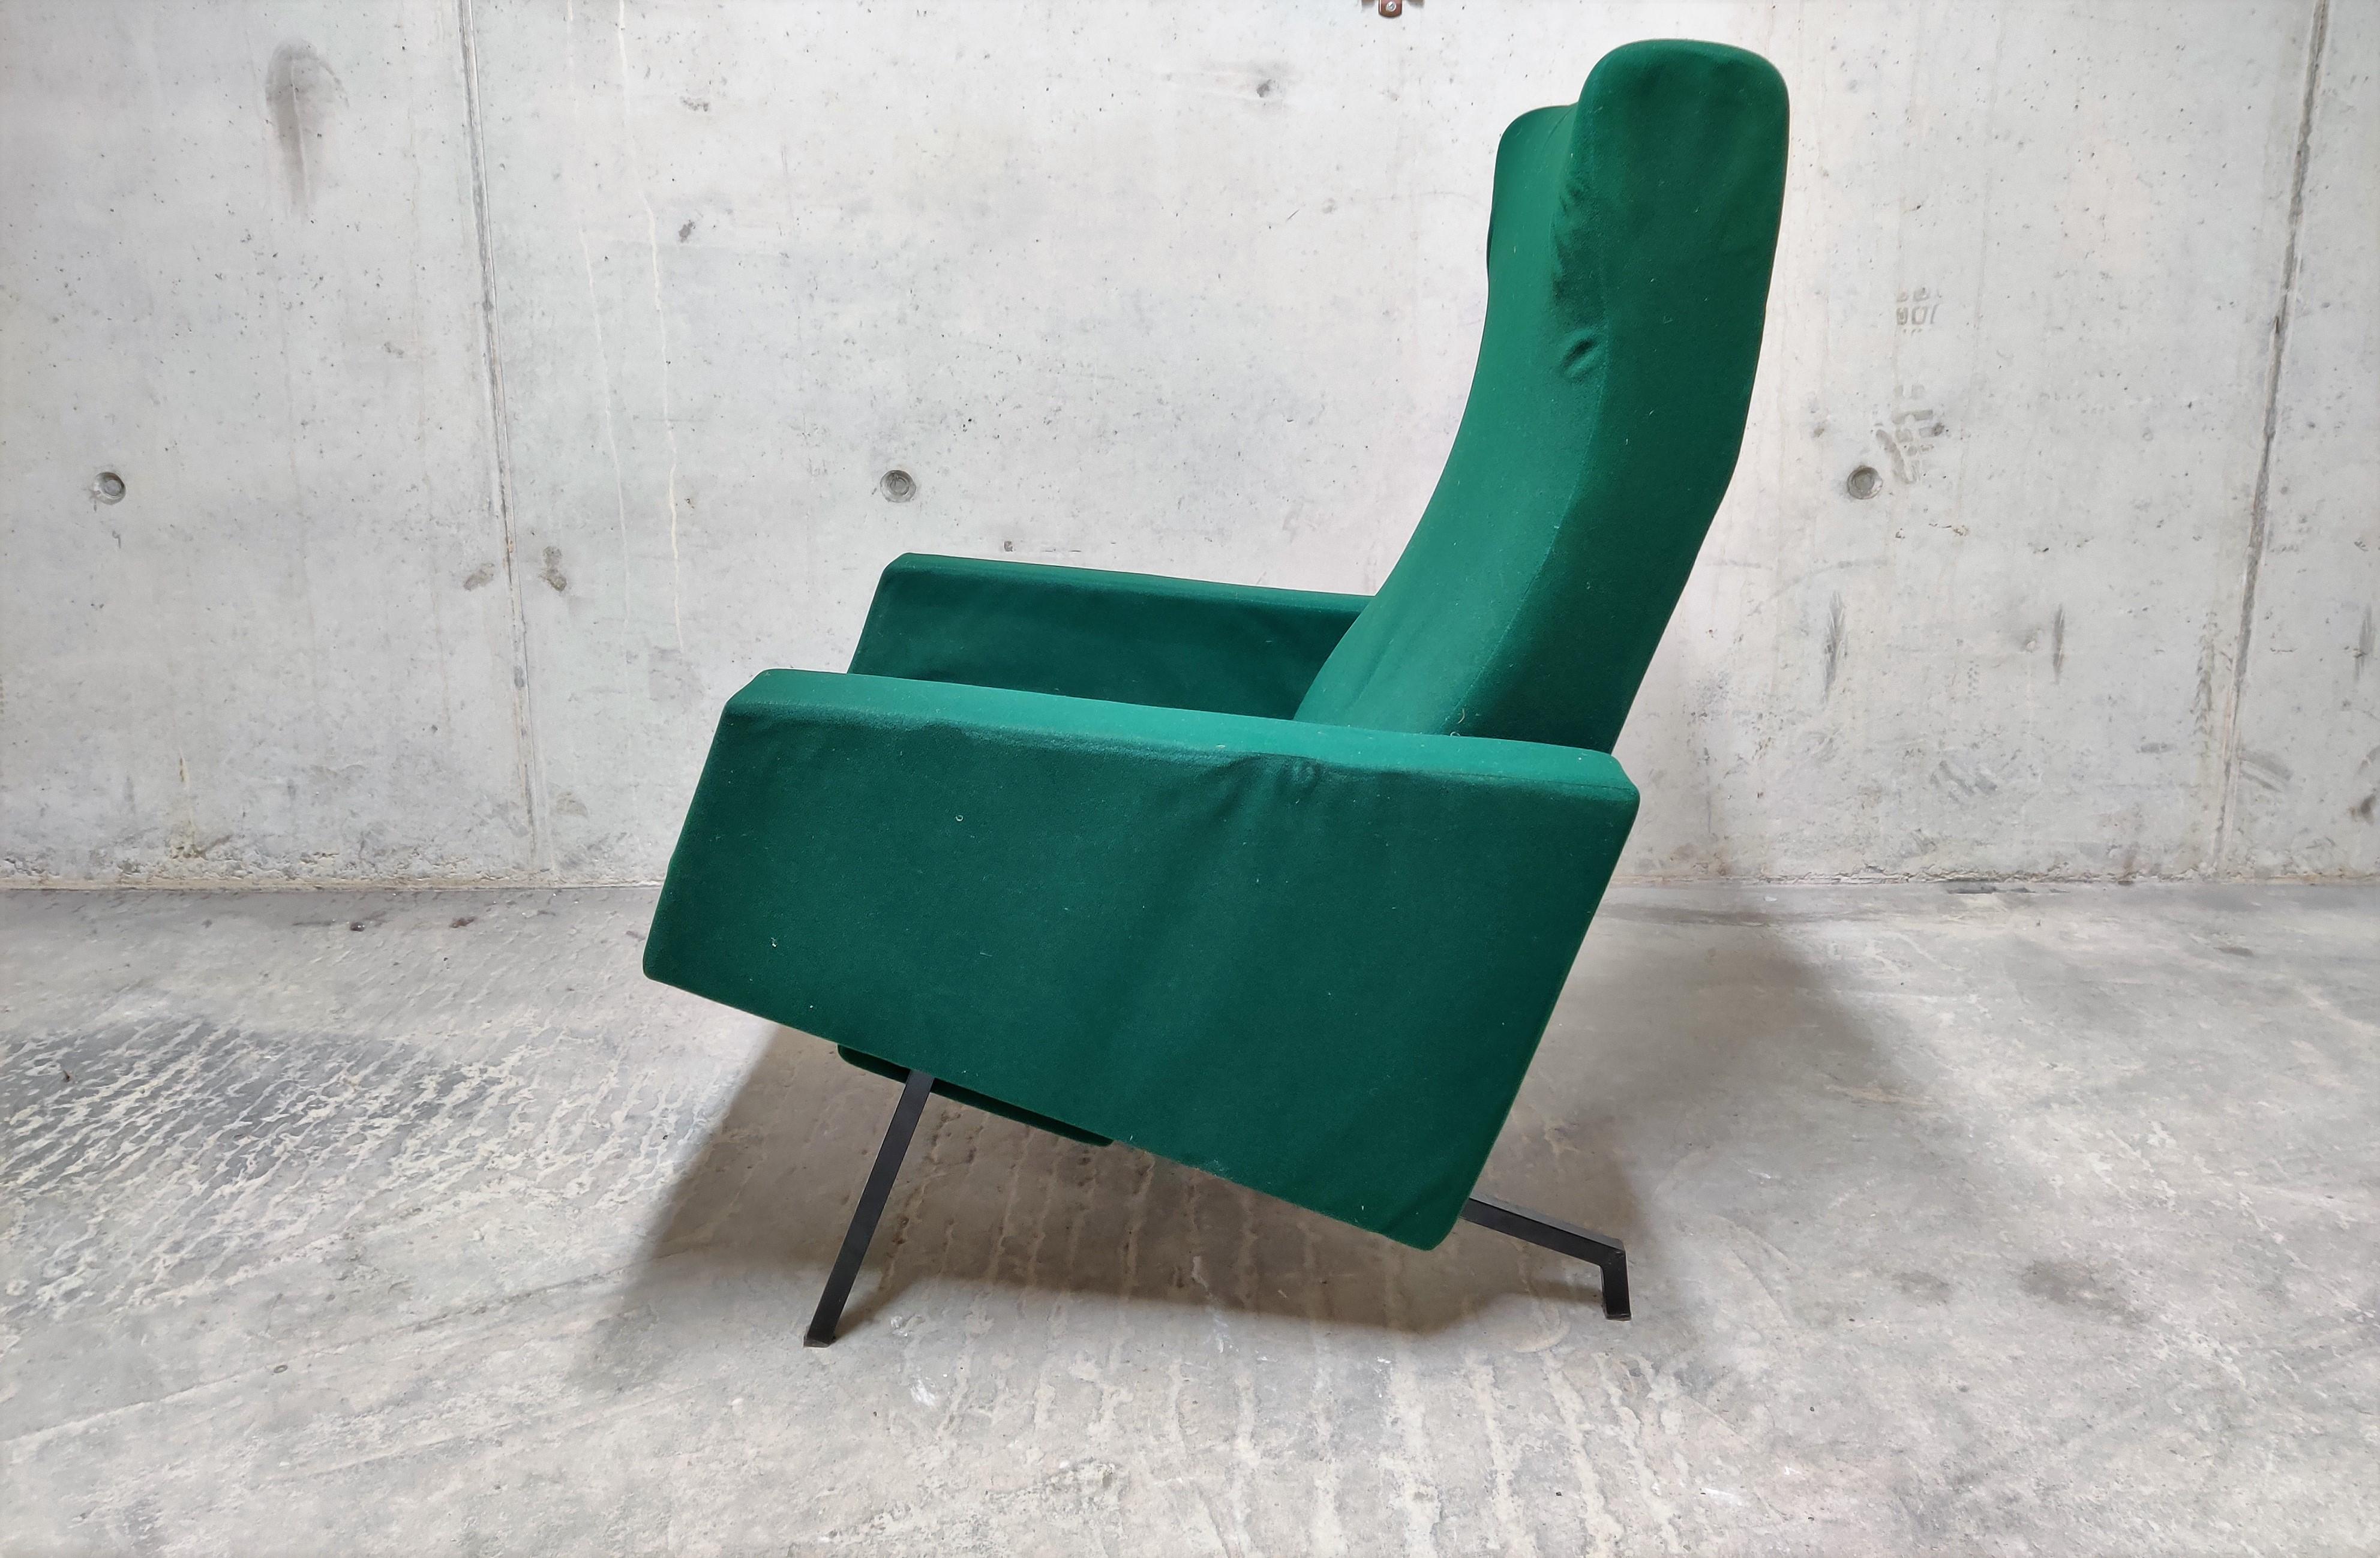 French Vintage Trelax Chair by Pierre Guariche for Meurop, 1950s For Sale